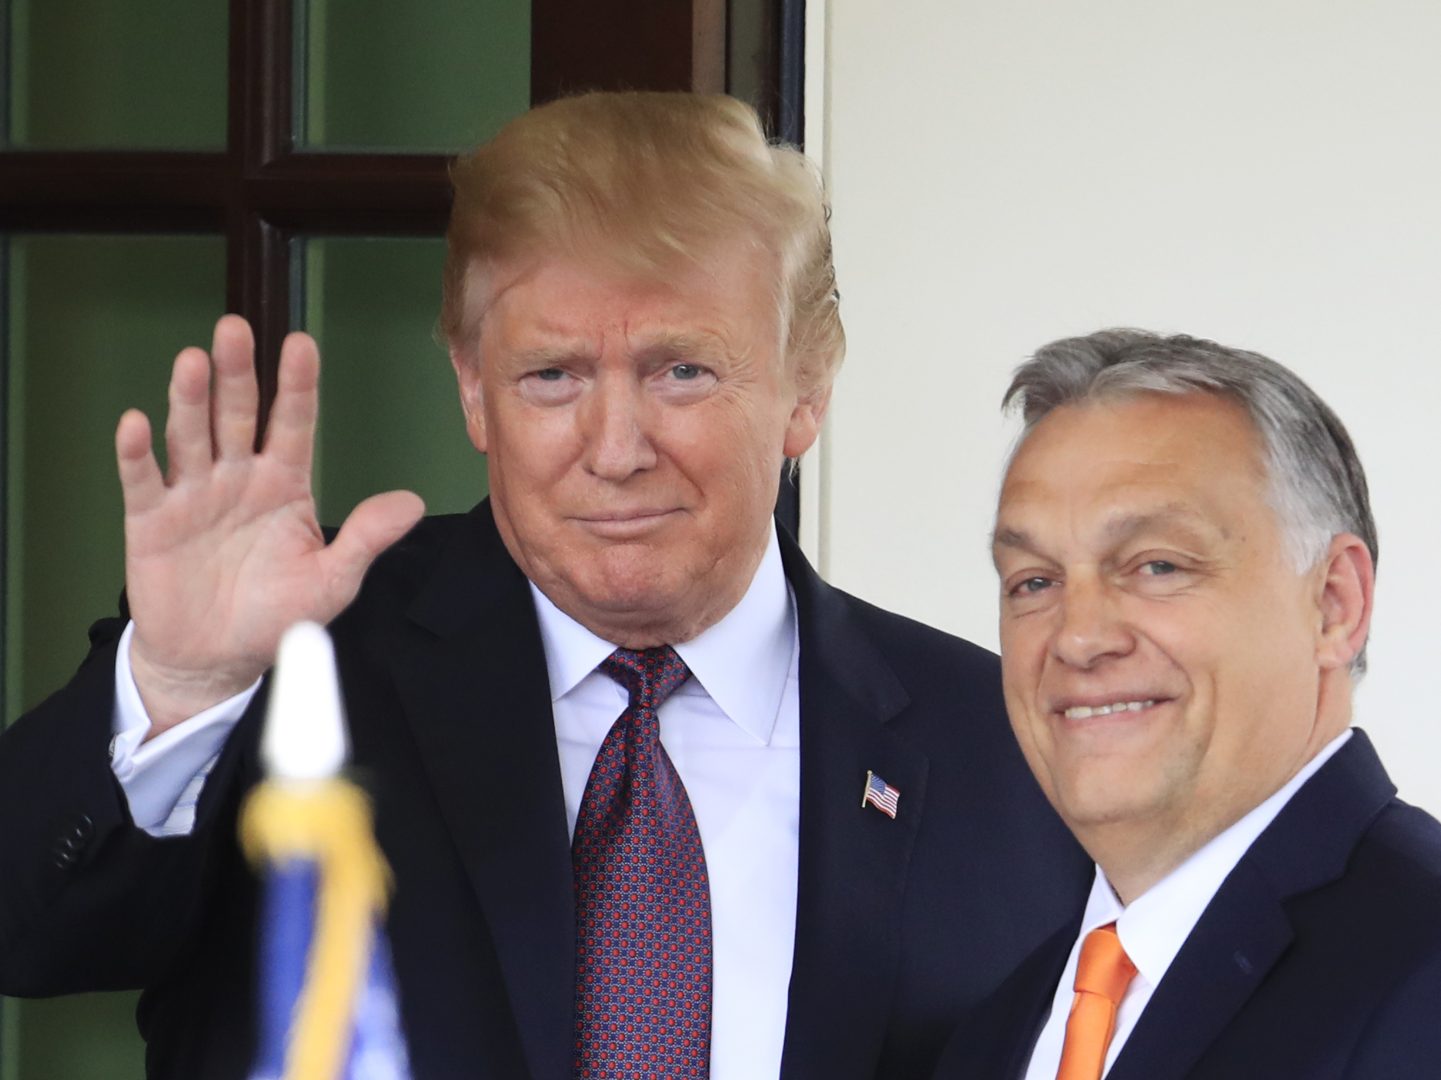 FILE - In this Monday, May 13, 2019 file photo, U.S. President Donald Trump welcomes Hungary Prime Minister Viktor Orban to the White House in Washington. The European Parliament elections have never been so hotly anticipated or contested, with many predicting that this year’s ballot will mark a coming-of-age moment for the euroskeptic far-right movement. The elections start Thursday May 23, 2019 and run through Sunday May 26 and are taking place in all of the European Union’s 28 nations. 